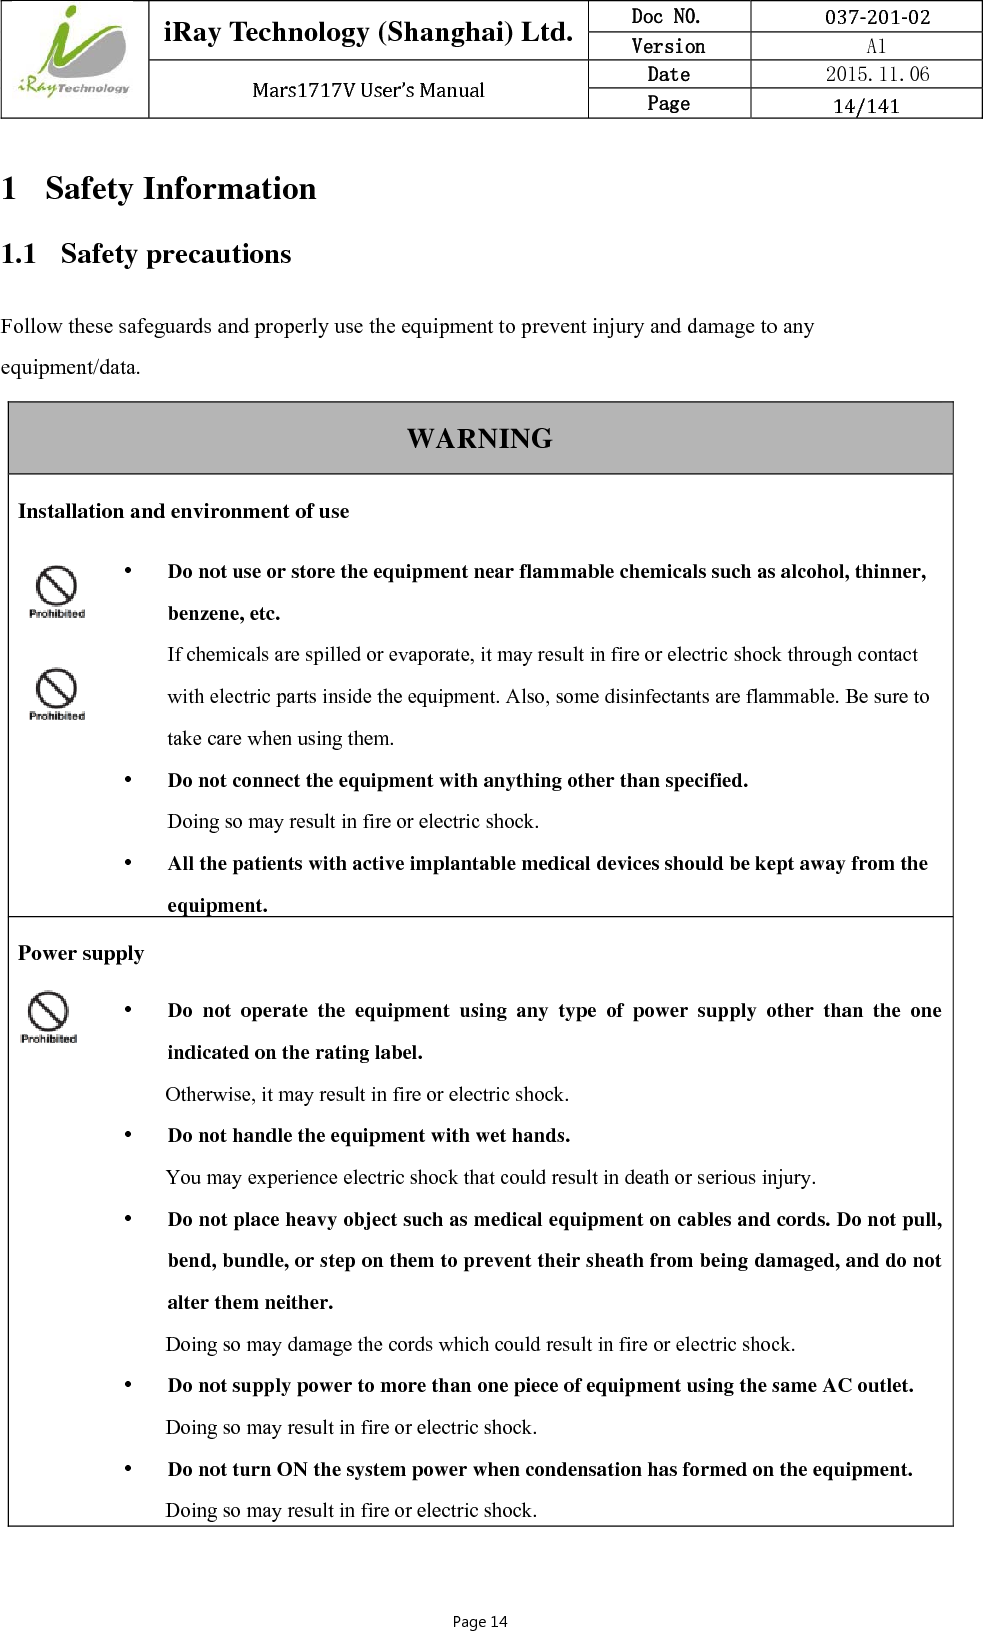  iRay Technology (Shanghai) Ltd. Doc N0.  037‐201‐02 Version    A1 Mars1717VUser’sManual Date  2015.11.06 Page  14/141Page 14 1 Safety Information 1.1 Safety precautions Follow these safeguards and properly use the equipment to prevent injury and damage to any equipment/data. WARNING Installation and environment of use   Do not use or store the equipment near flammable chemicals such as alcohol, thinner, benzene, etc. If chemicals are spilled or evaporate, it may result in fire or electric shock through contact with electric parts inside the equipment. Also, some disinfectants are flammable. Be sure to take care when using them.  Do not connect the equipment with anything other than specified. Doing so may result in fire or electric shock.  All the patients with active implantable medical devices should be kept away from the equipment. Power supply  Do not operate the equipment using any type of power supply other than the one indicated on the rating label. Otherwise, it may result in fire or electric shock.  Do not handle the equipment with wet hands. You may experience electric shock that could result in death or serious injury.  Do not place heavy object such as medical equipment on cables and cords. Do not pull, bend, bundle, or step on them to prevent their sheath from being damaged, and do not alter them neither. Doing so may damage the cords which could result in fire or electric shock.  Do not supply power to more than one piece of equipment using the same AC outlet. Doing so may result in fire or electric shock.  Do not turn ON the system power when condensation has formed on the equipment. Doing so may result in fire or electric shock. 